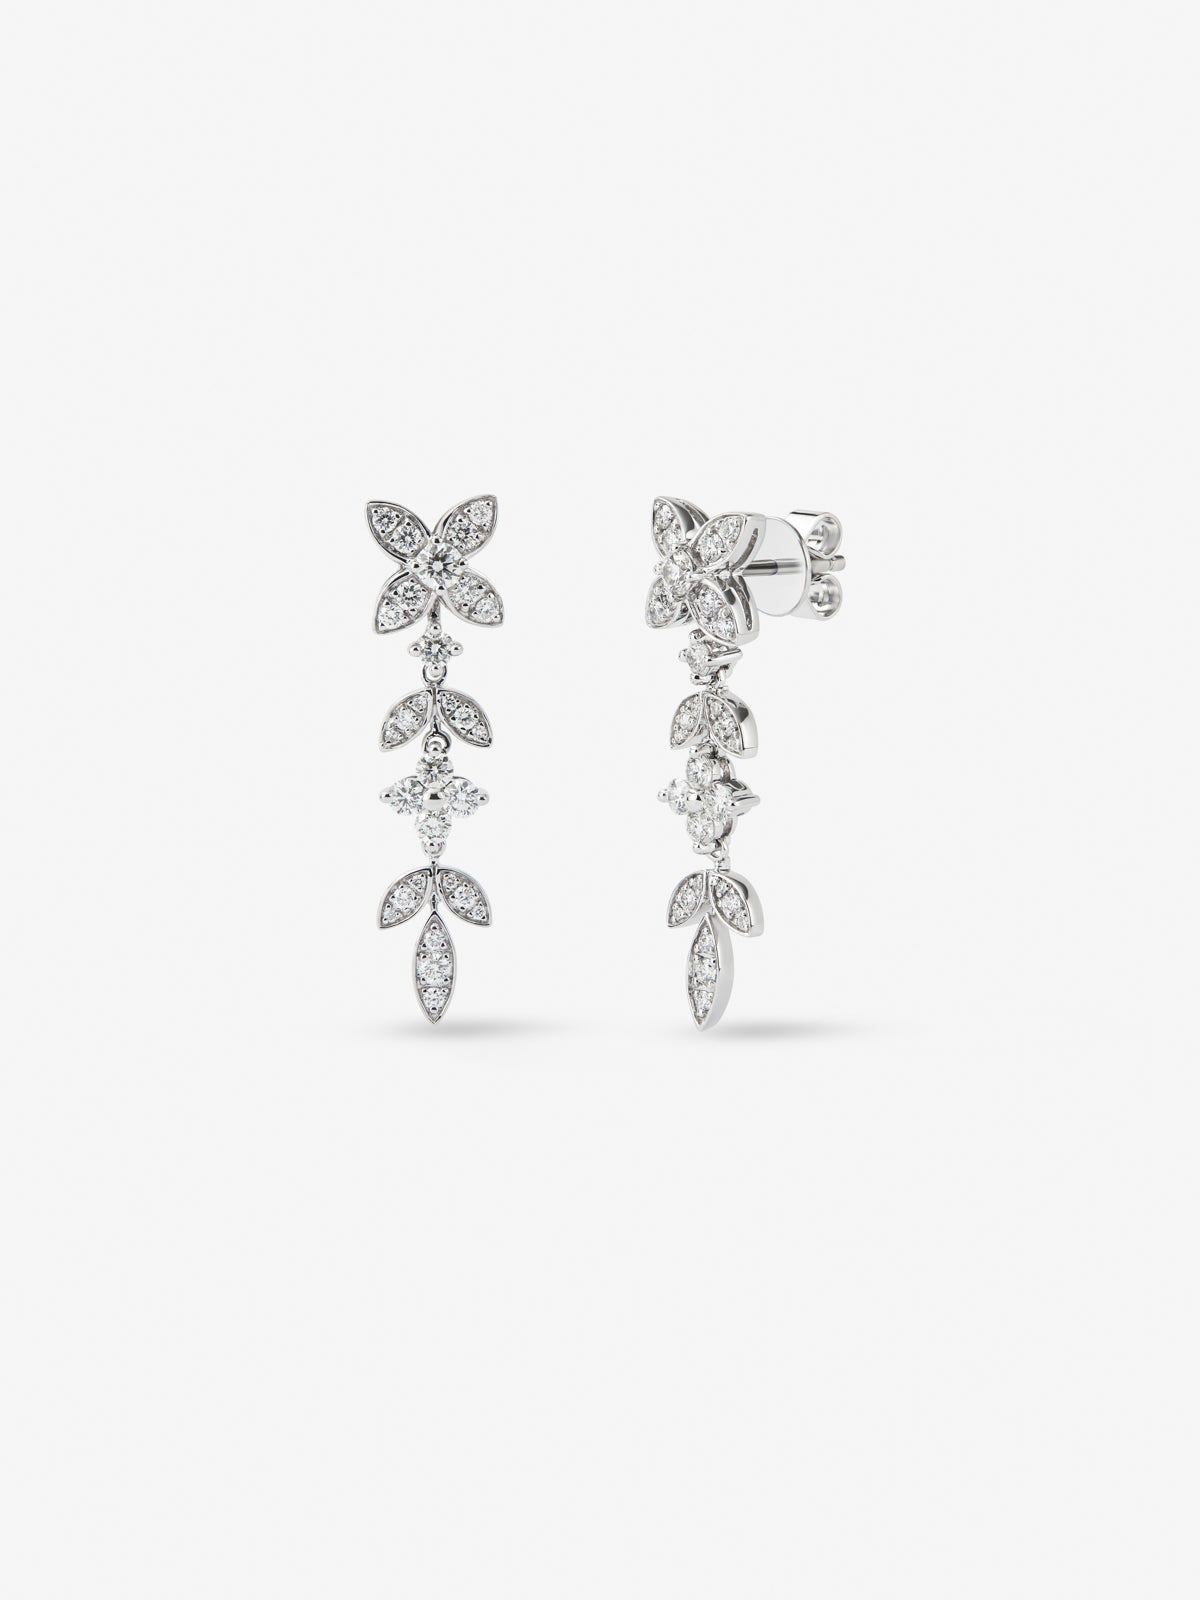 18K white gold earrings with 62 brilliant-cut diamonds with a total of 1.07 cts